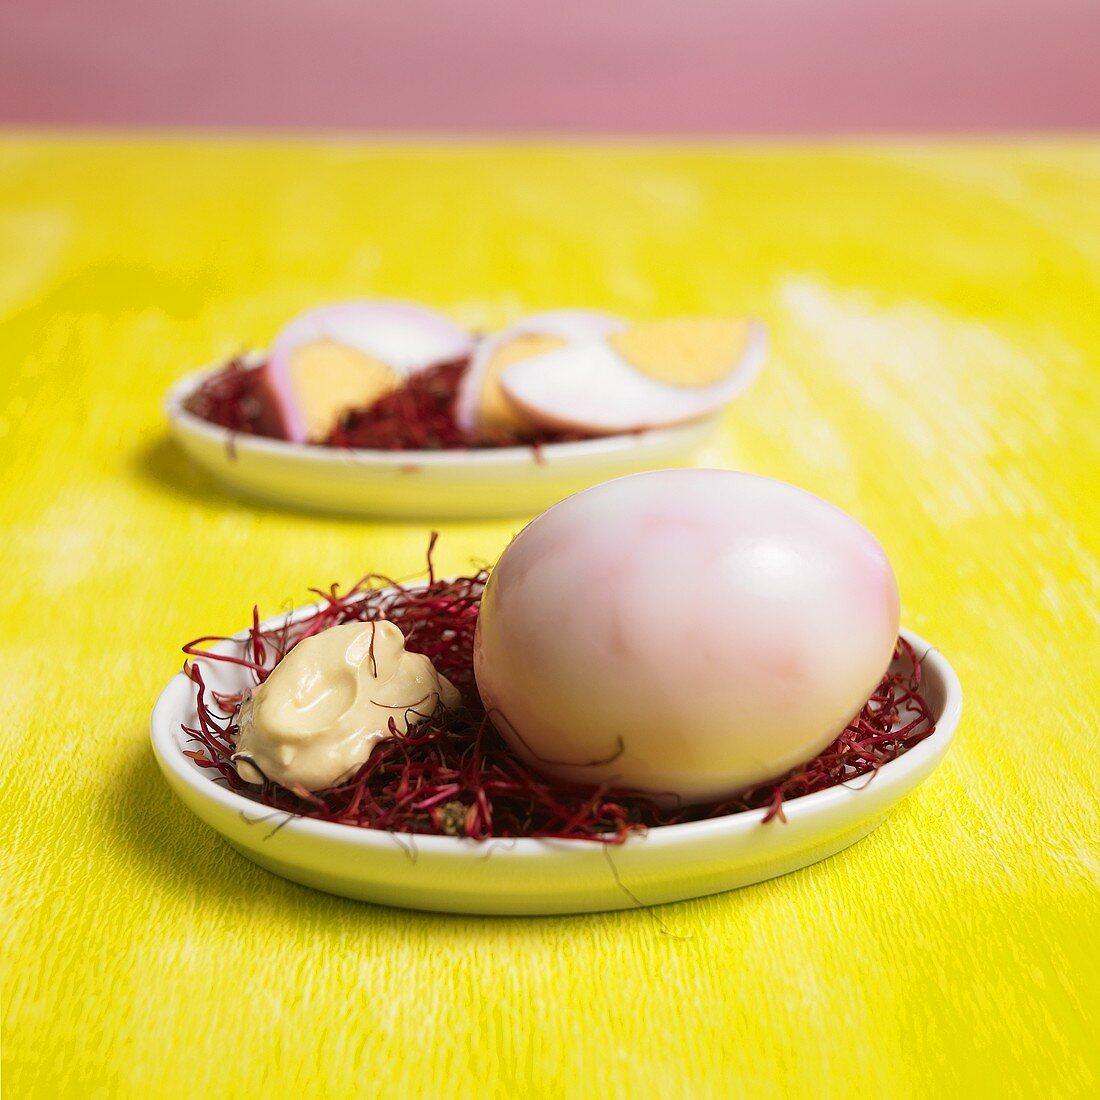 Marbled, hard-boiled egg with red cabbage and mayonnaise